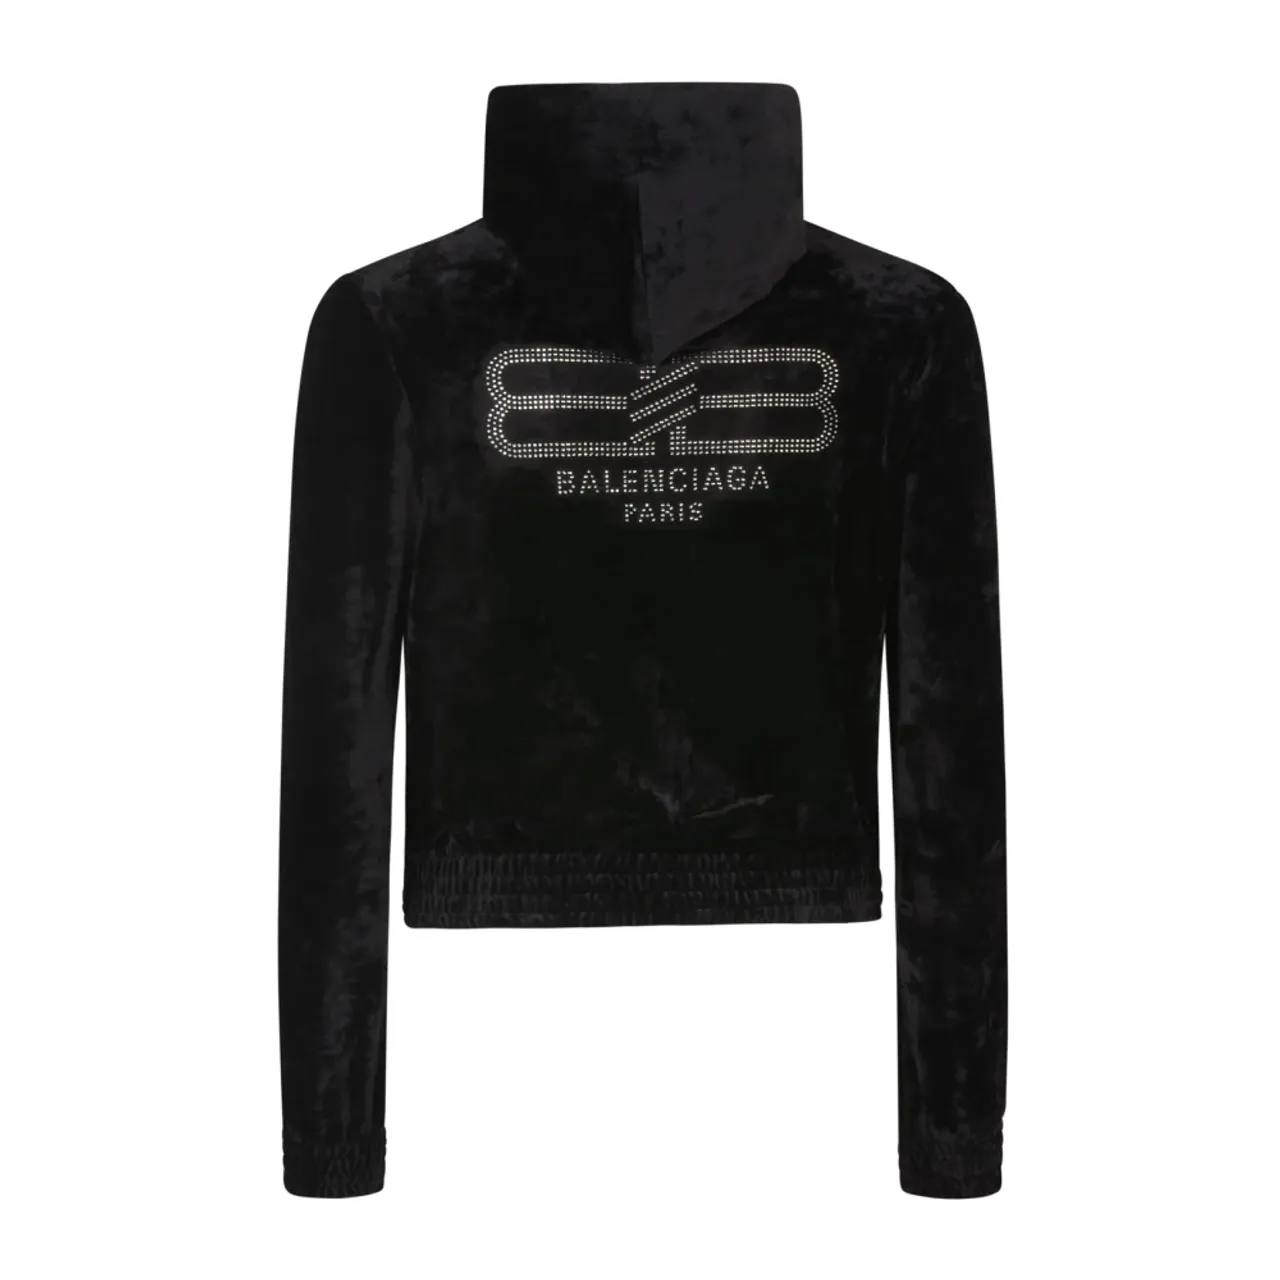 Balenciaga , Black Fitted Zip Up Hoodie Sweaters ,Black female, Sizes: